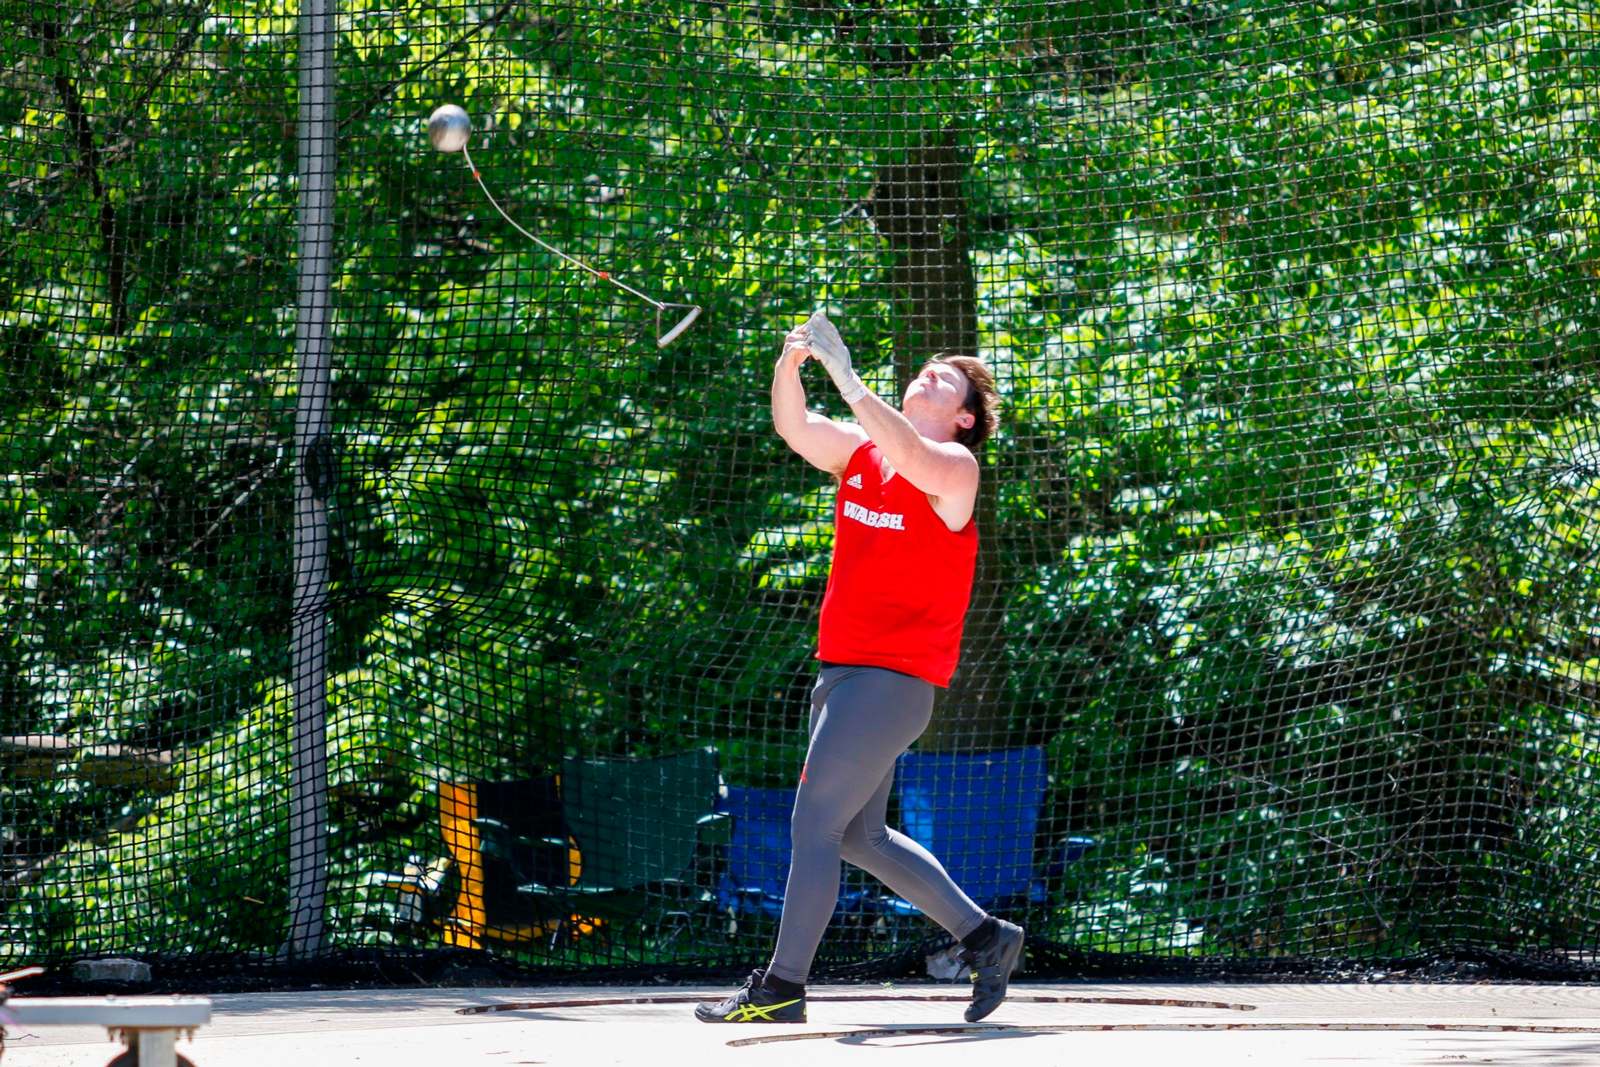 a person in a red shirt hitting a ball with a ball